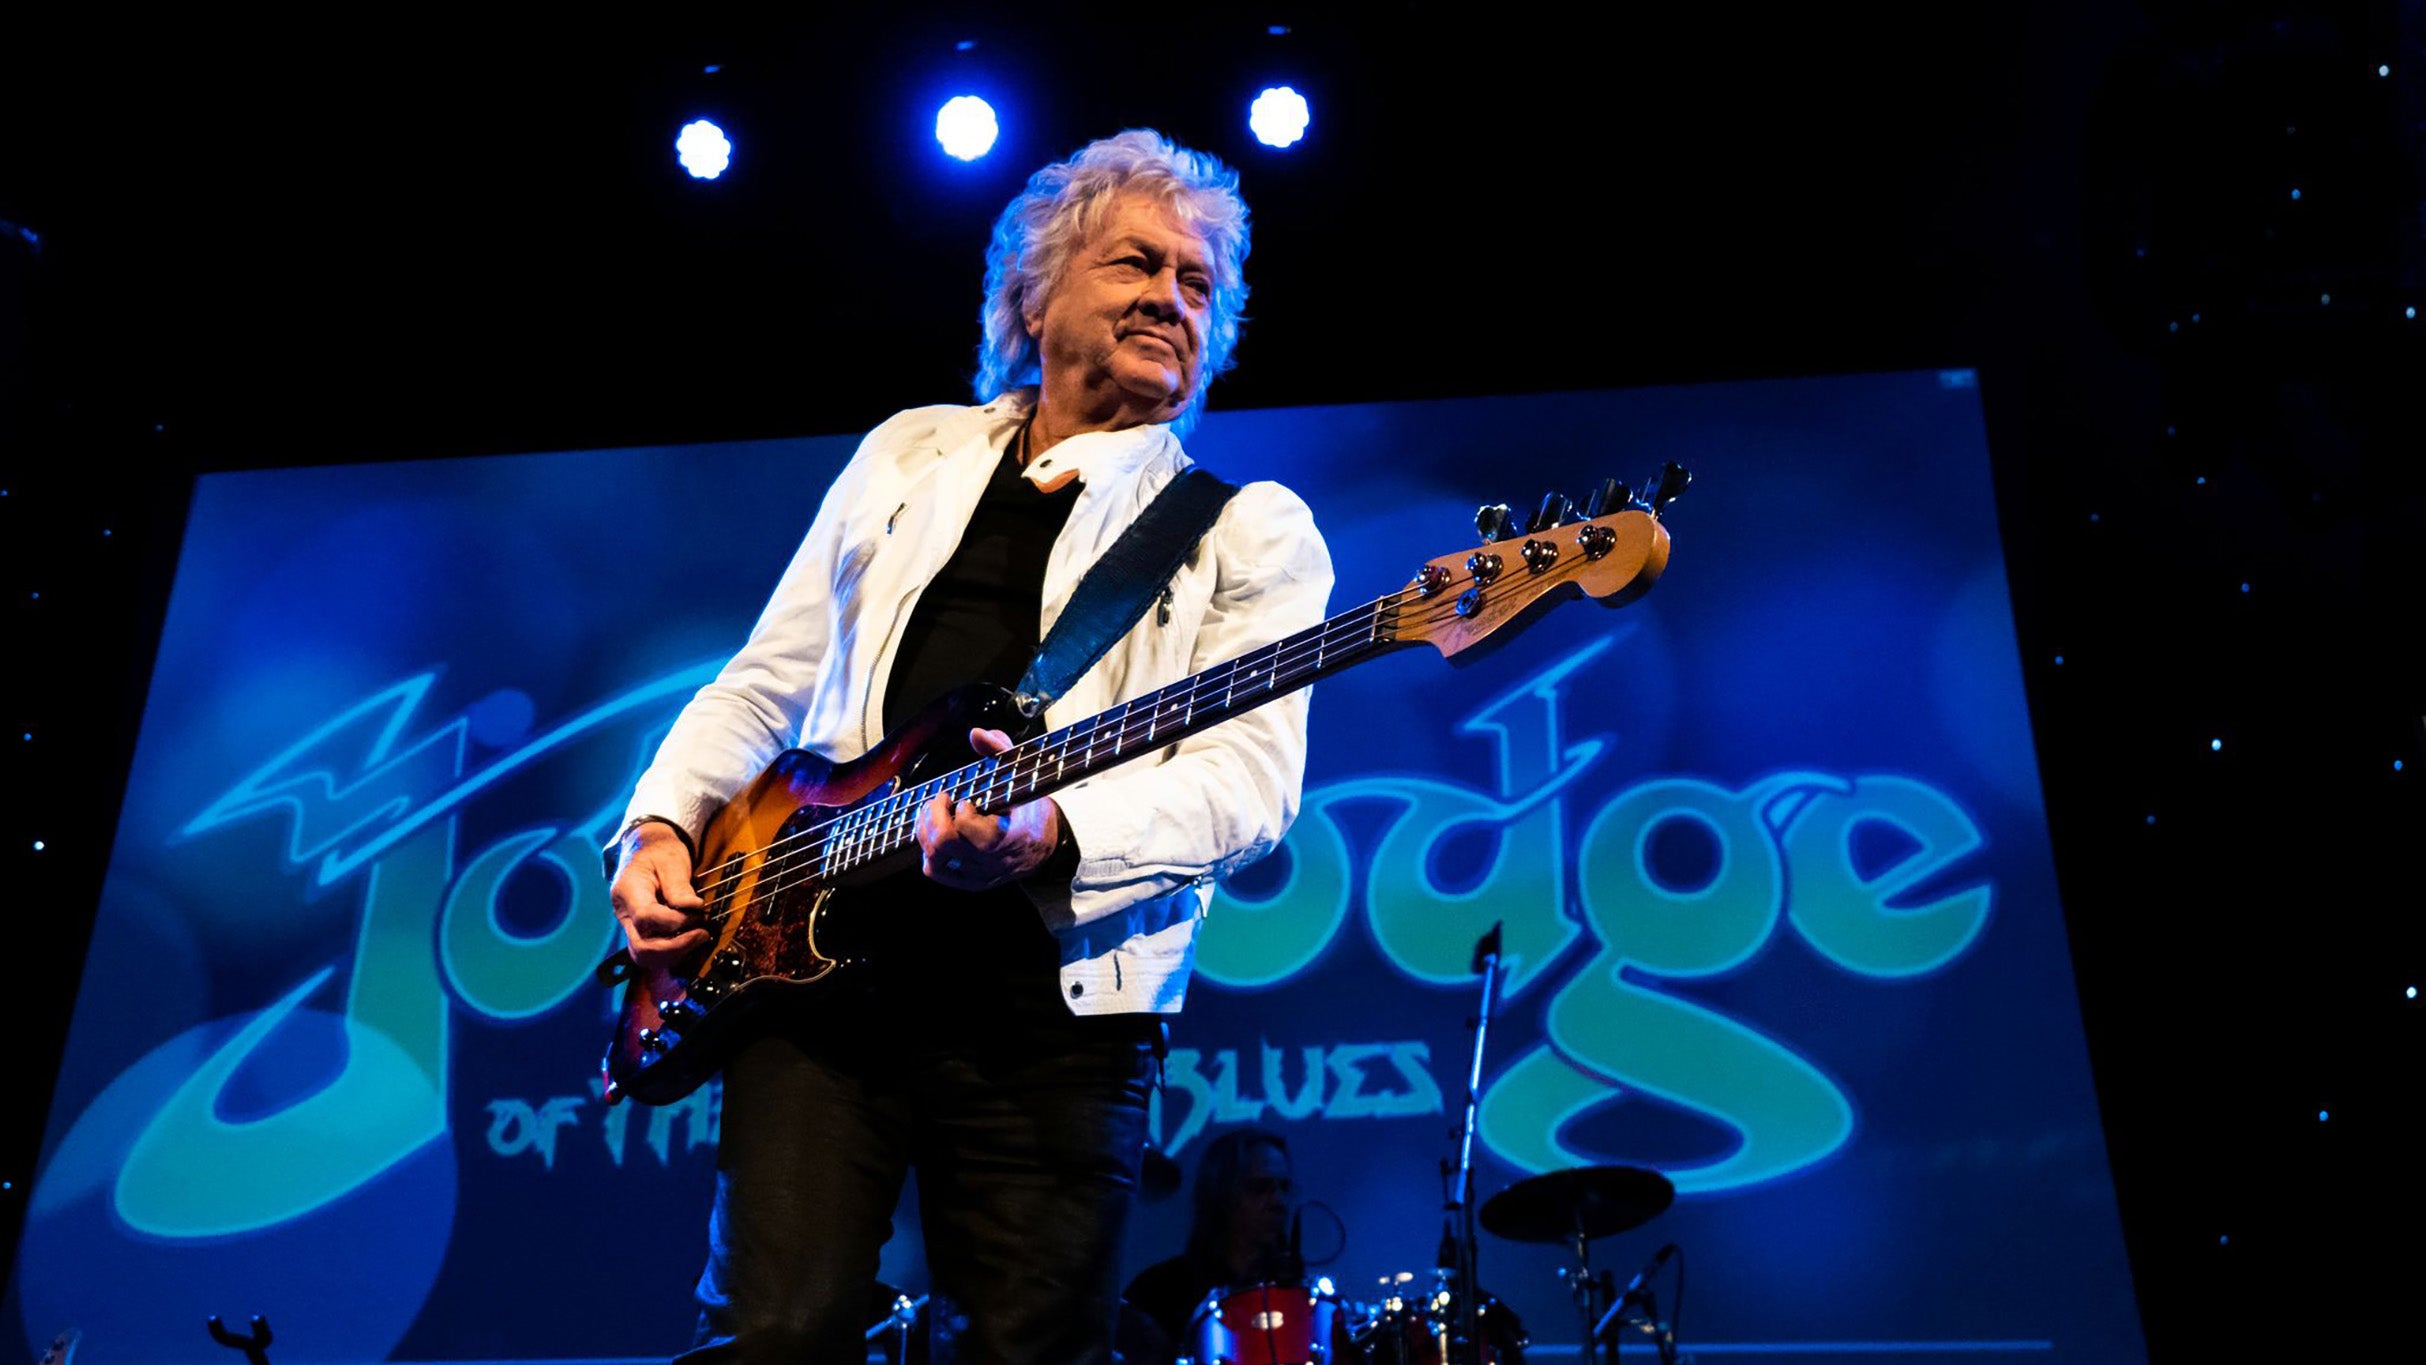 The Moody Blues' John Lodge in Glenside promo photo for Exclusive presale offer code